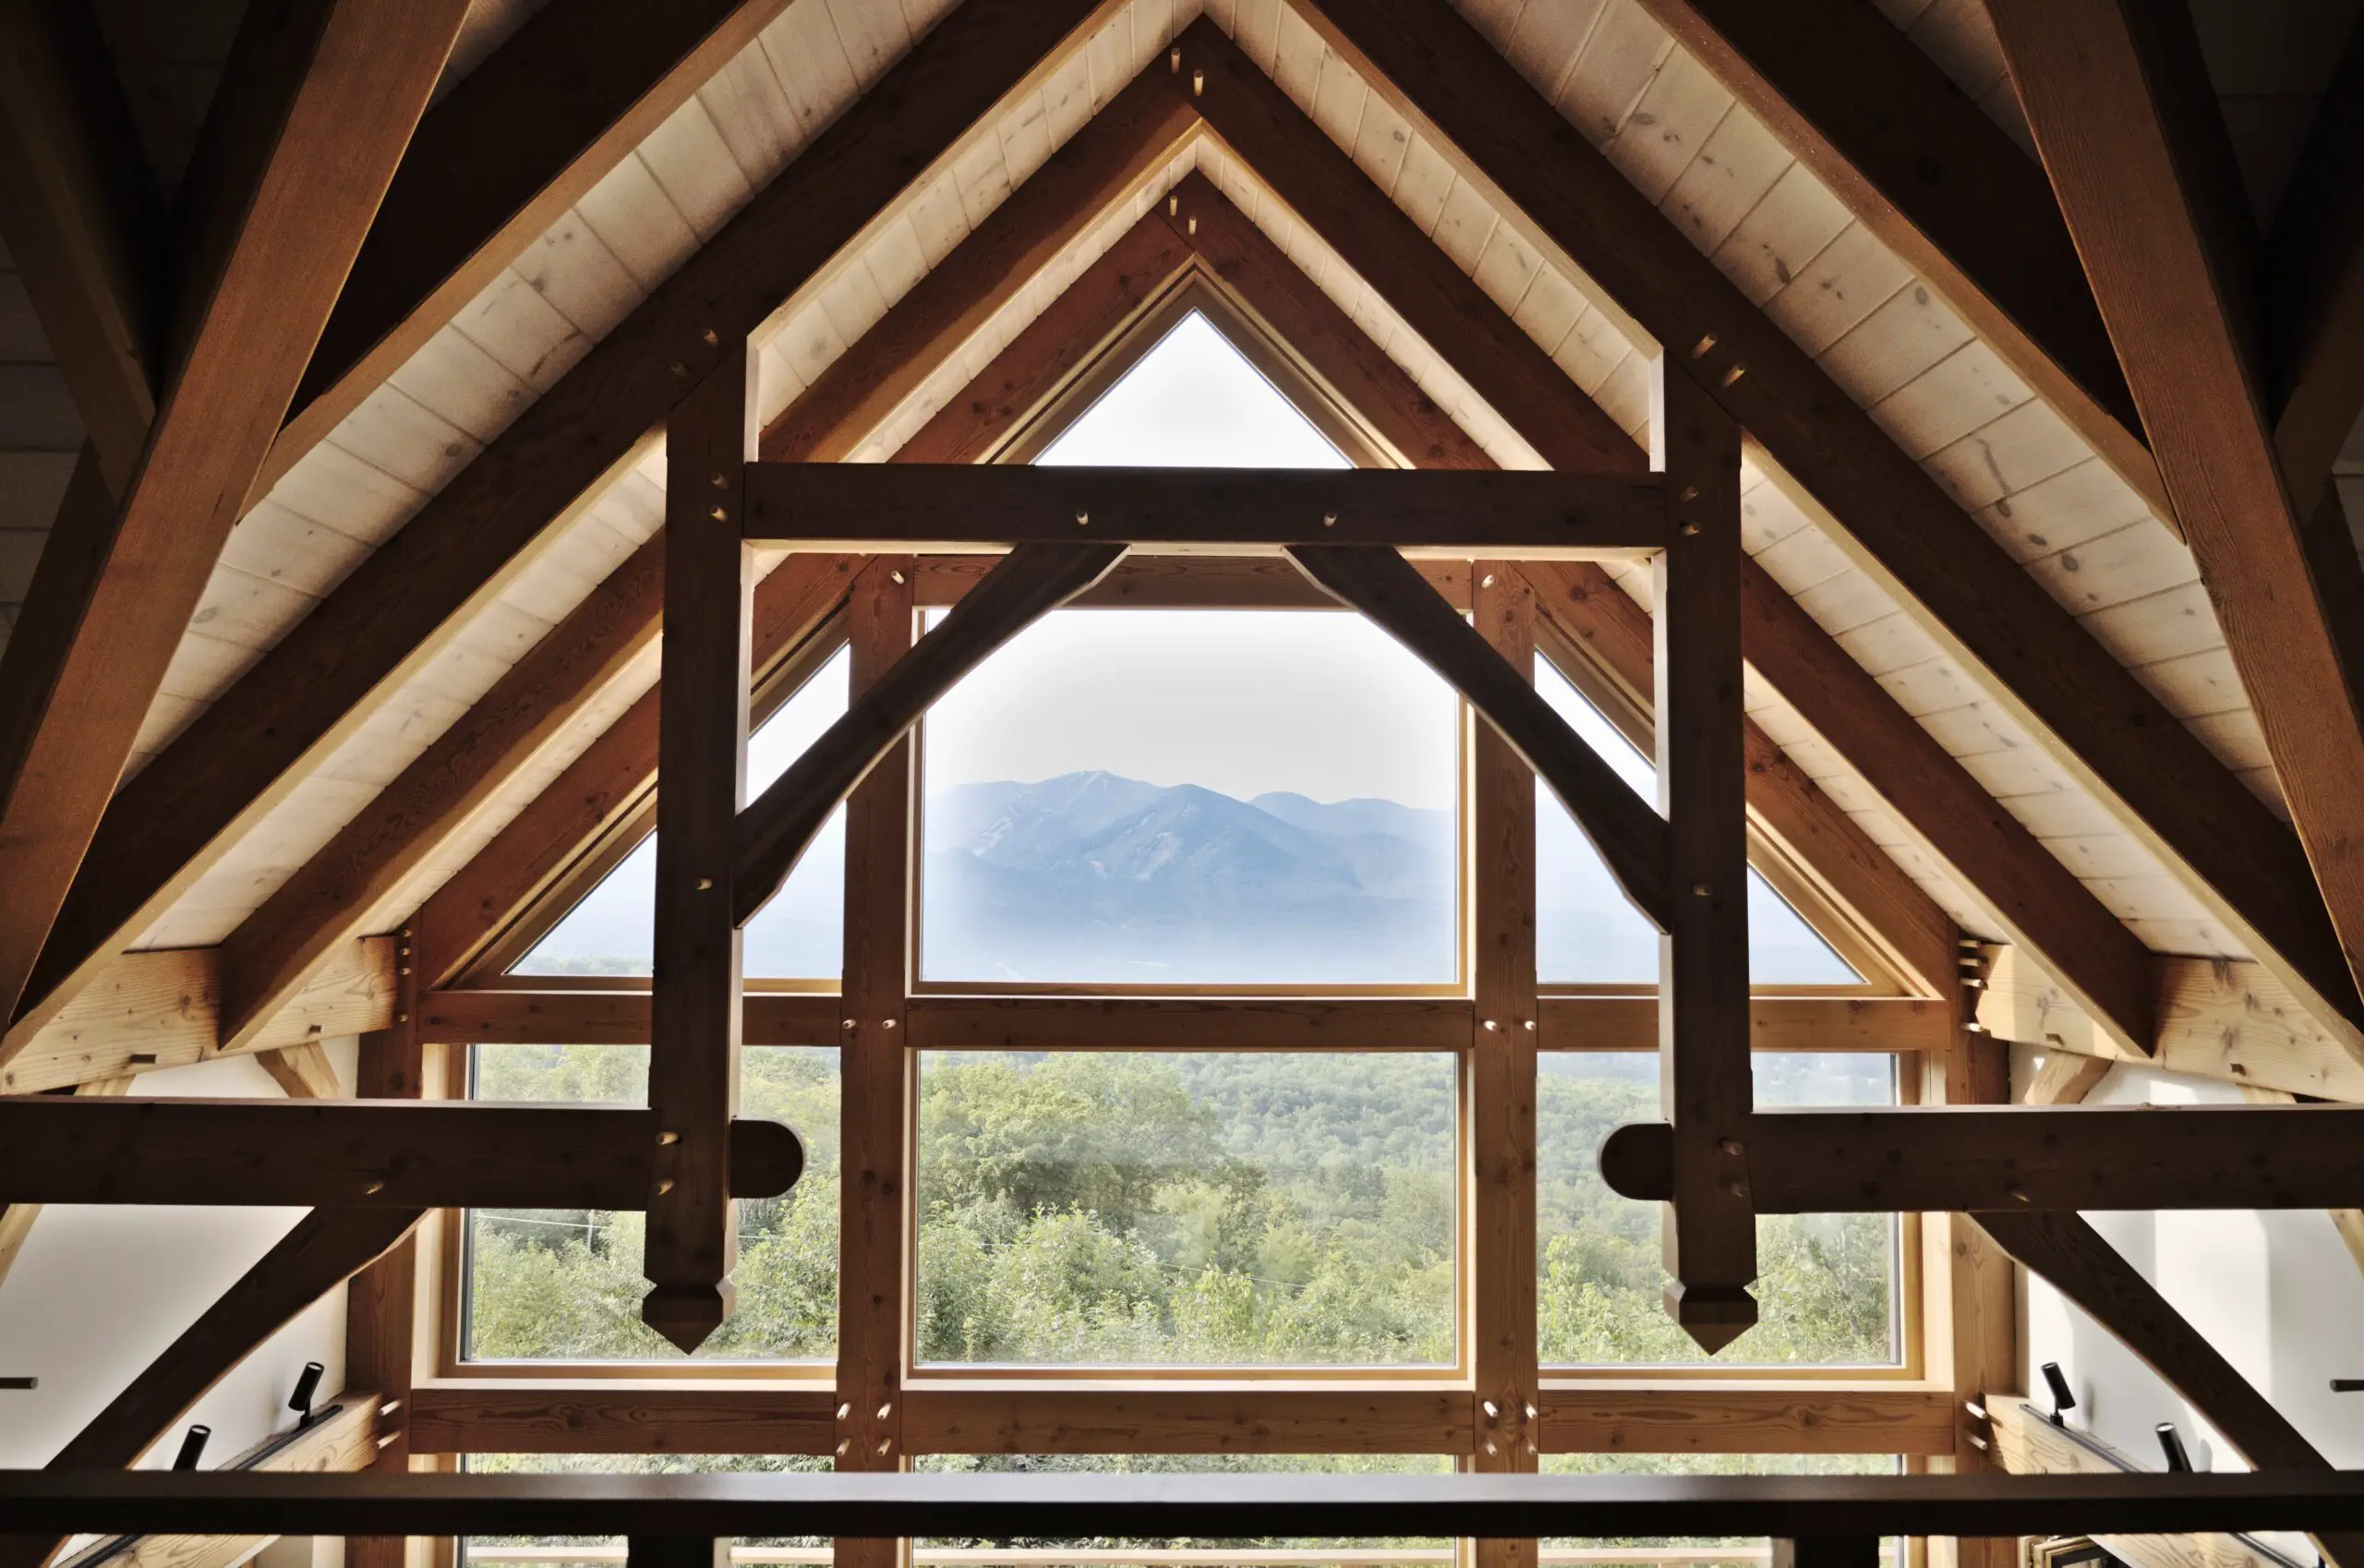 Wooden trusses on ceiling and wooden framed glass window